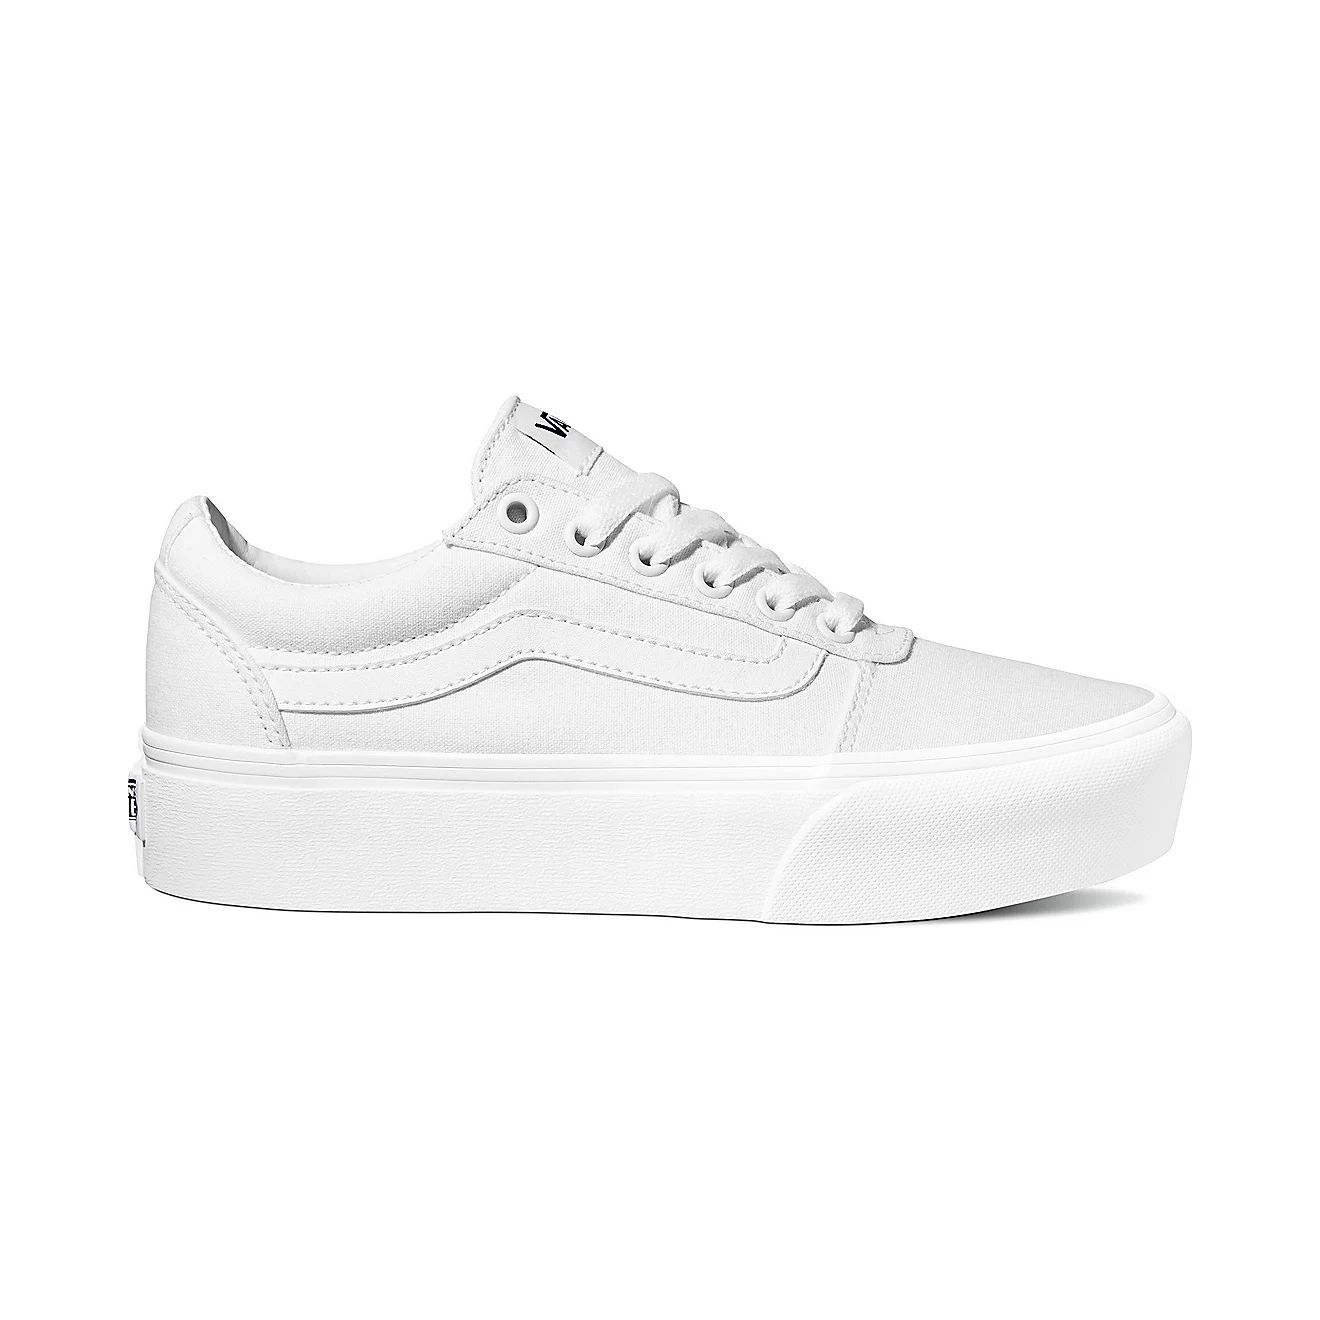 Vans Women's Ward Platform Shoes | Free Shipping at Academy | Academy Sports + Outdoors